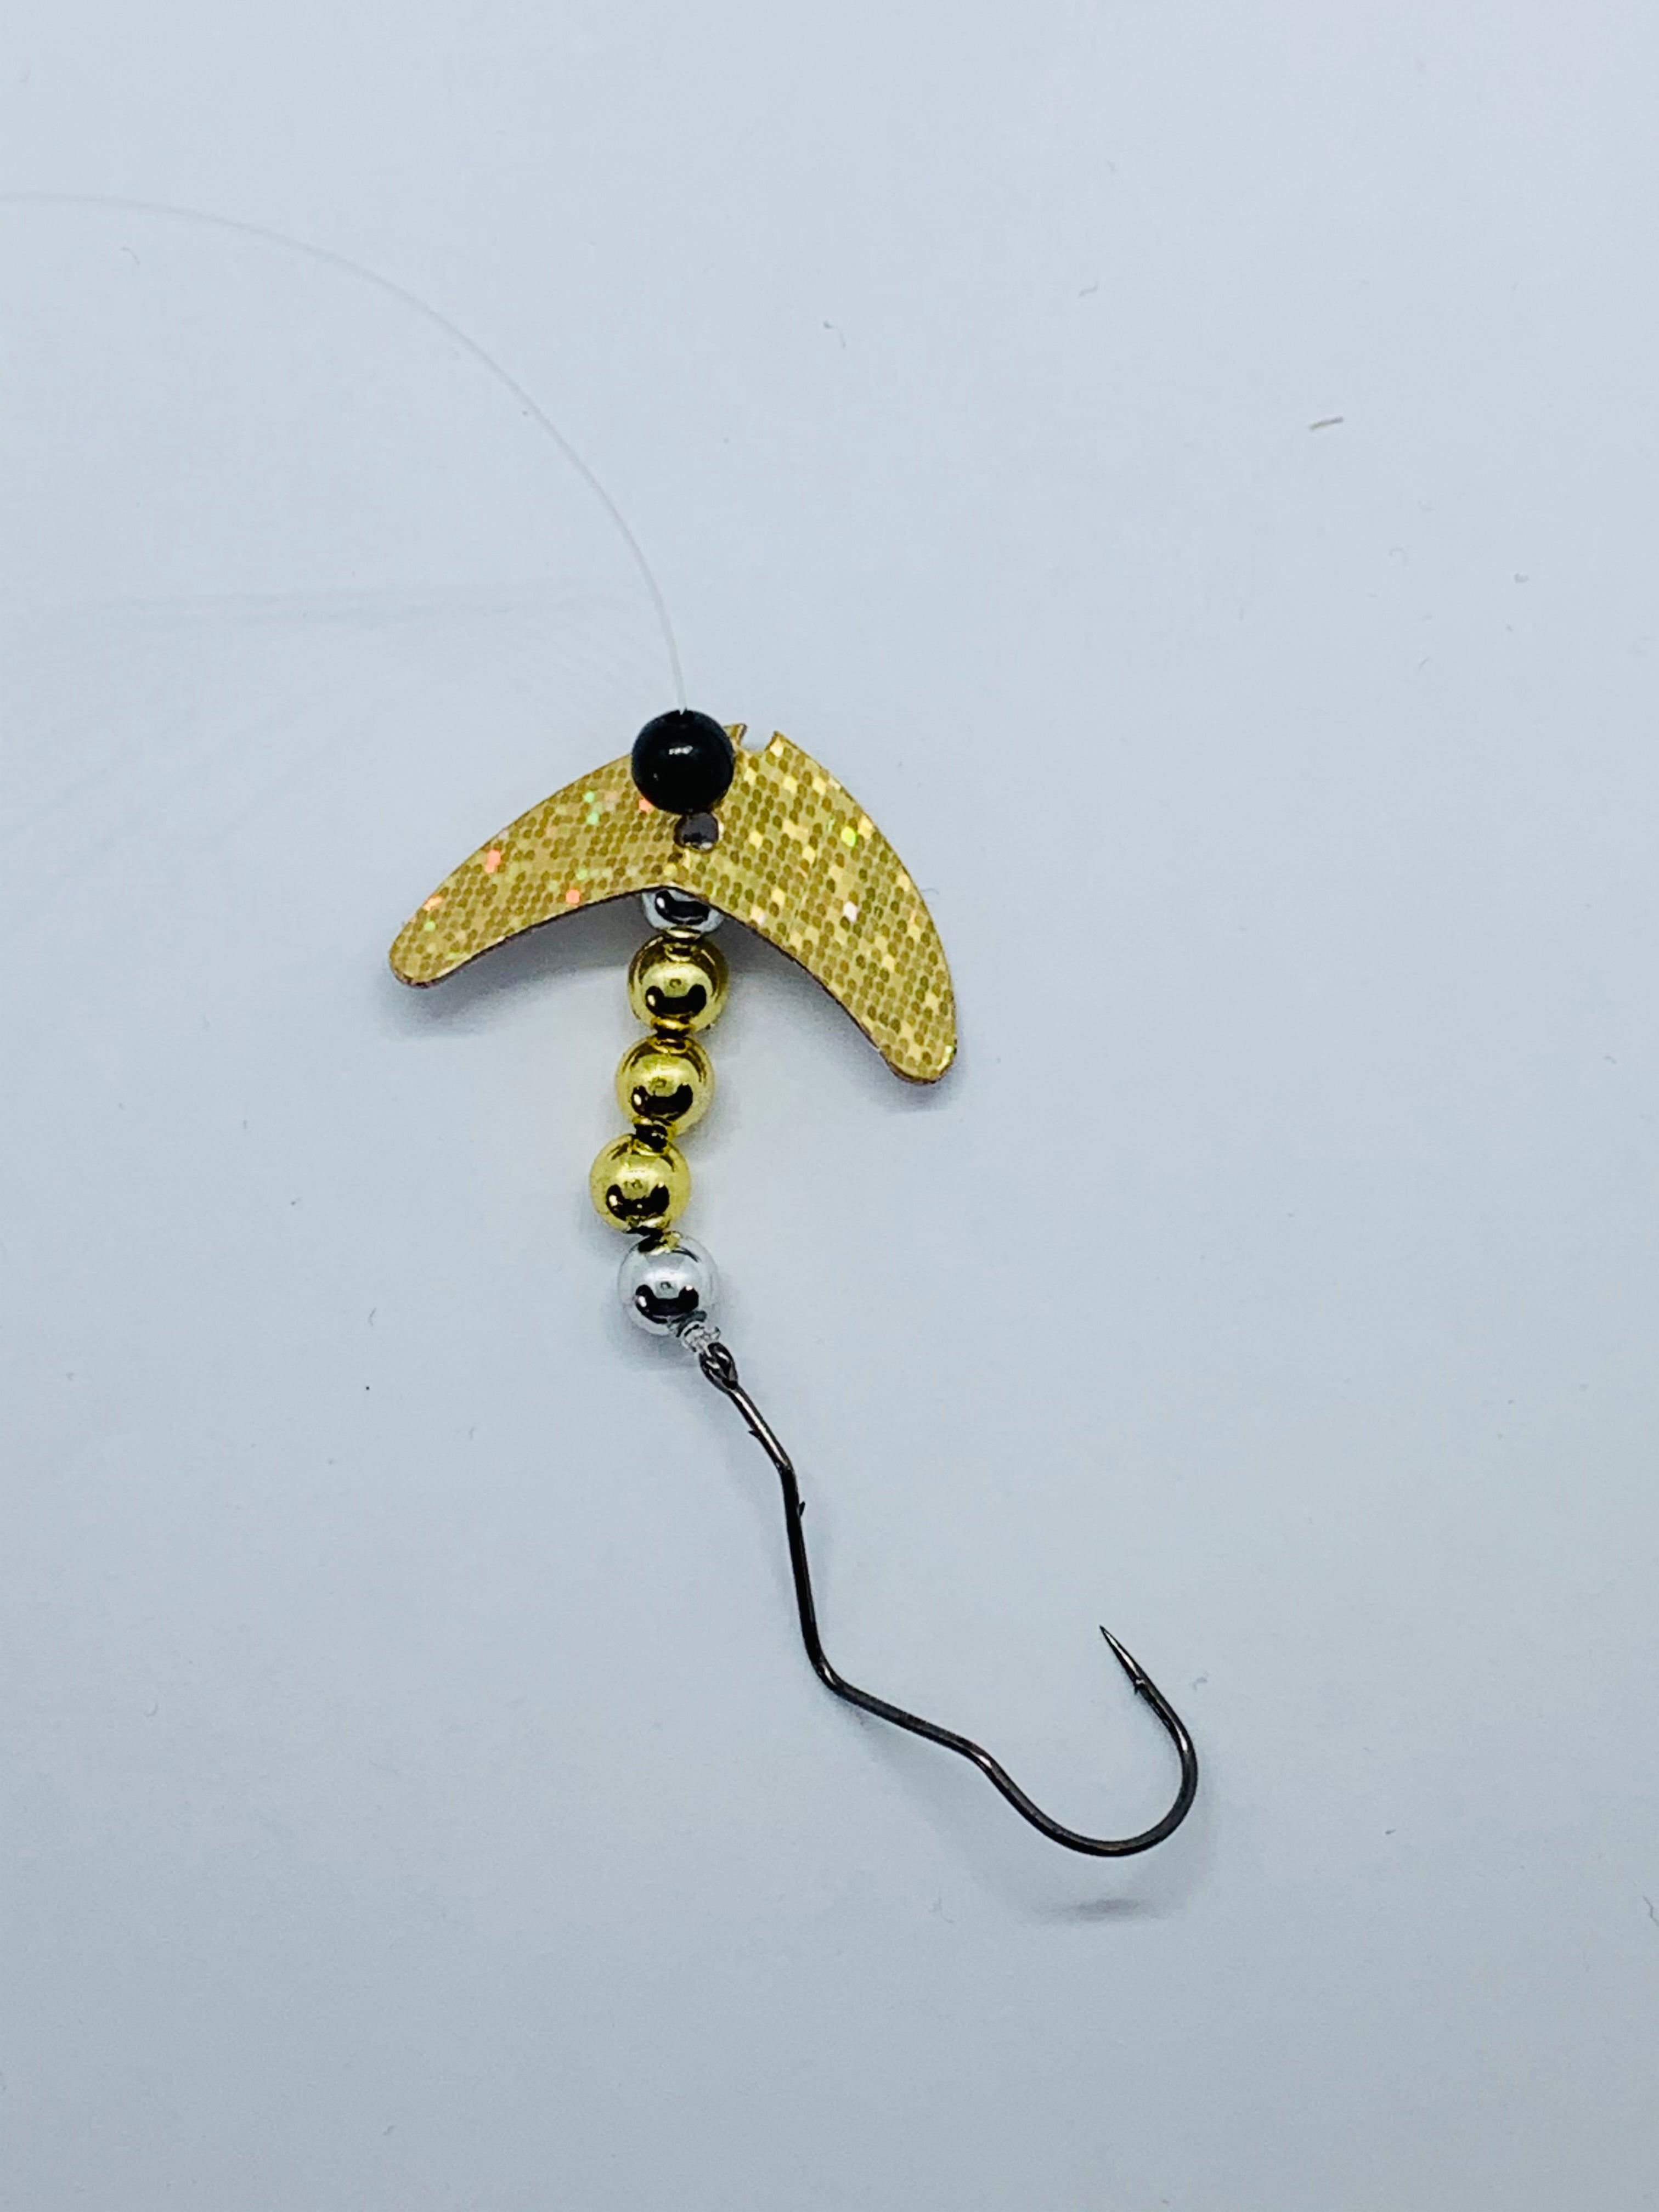 1.5 Smile blade harness with SUPER SLOW DEATH hook - Epic Fishing Tackle